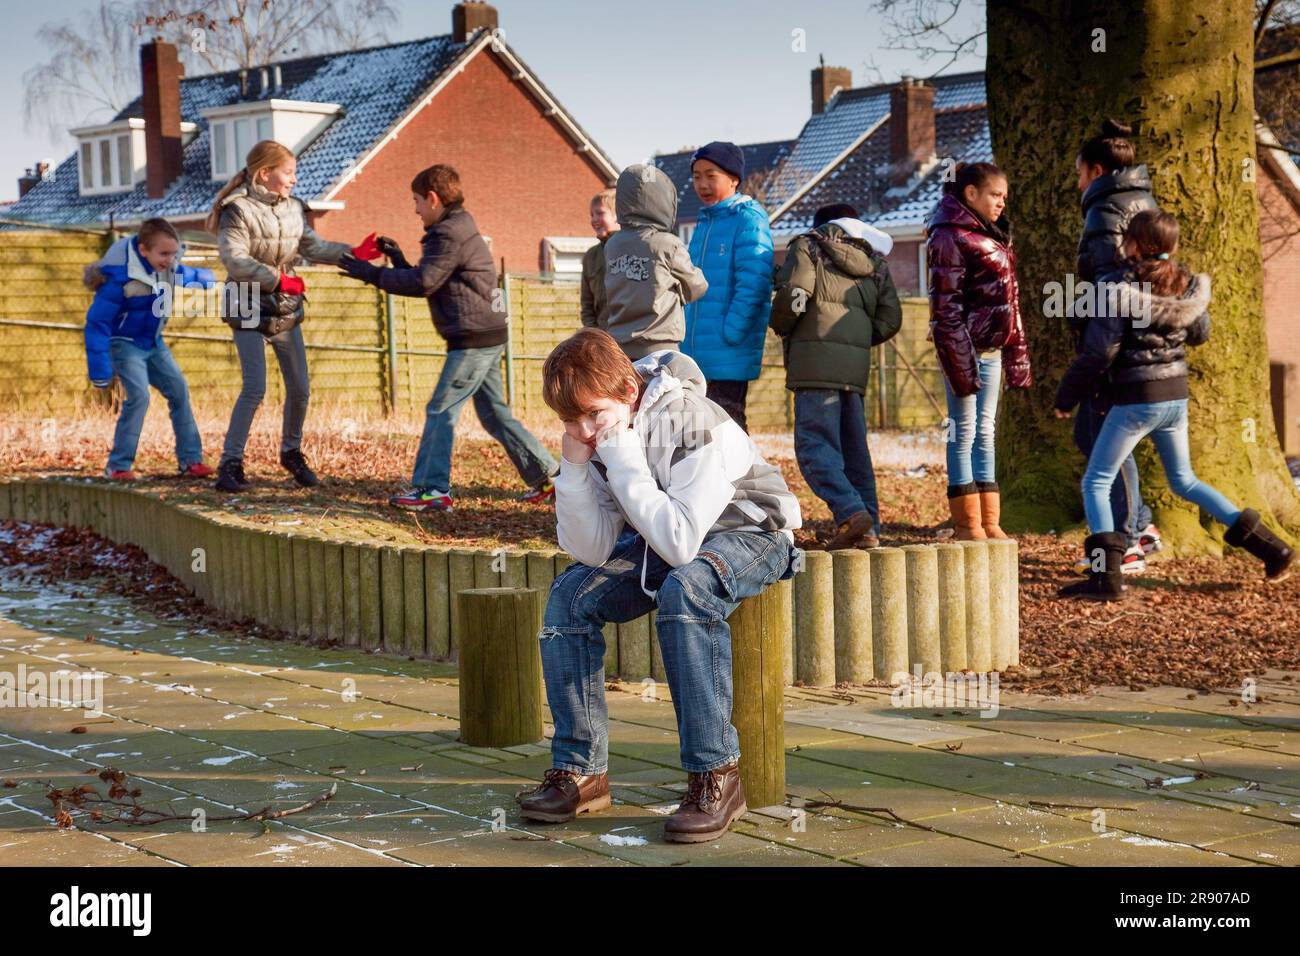 Netherlands, a child is left out and feels bullied in the playground of a primary school. Stock Photo